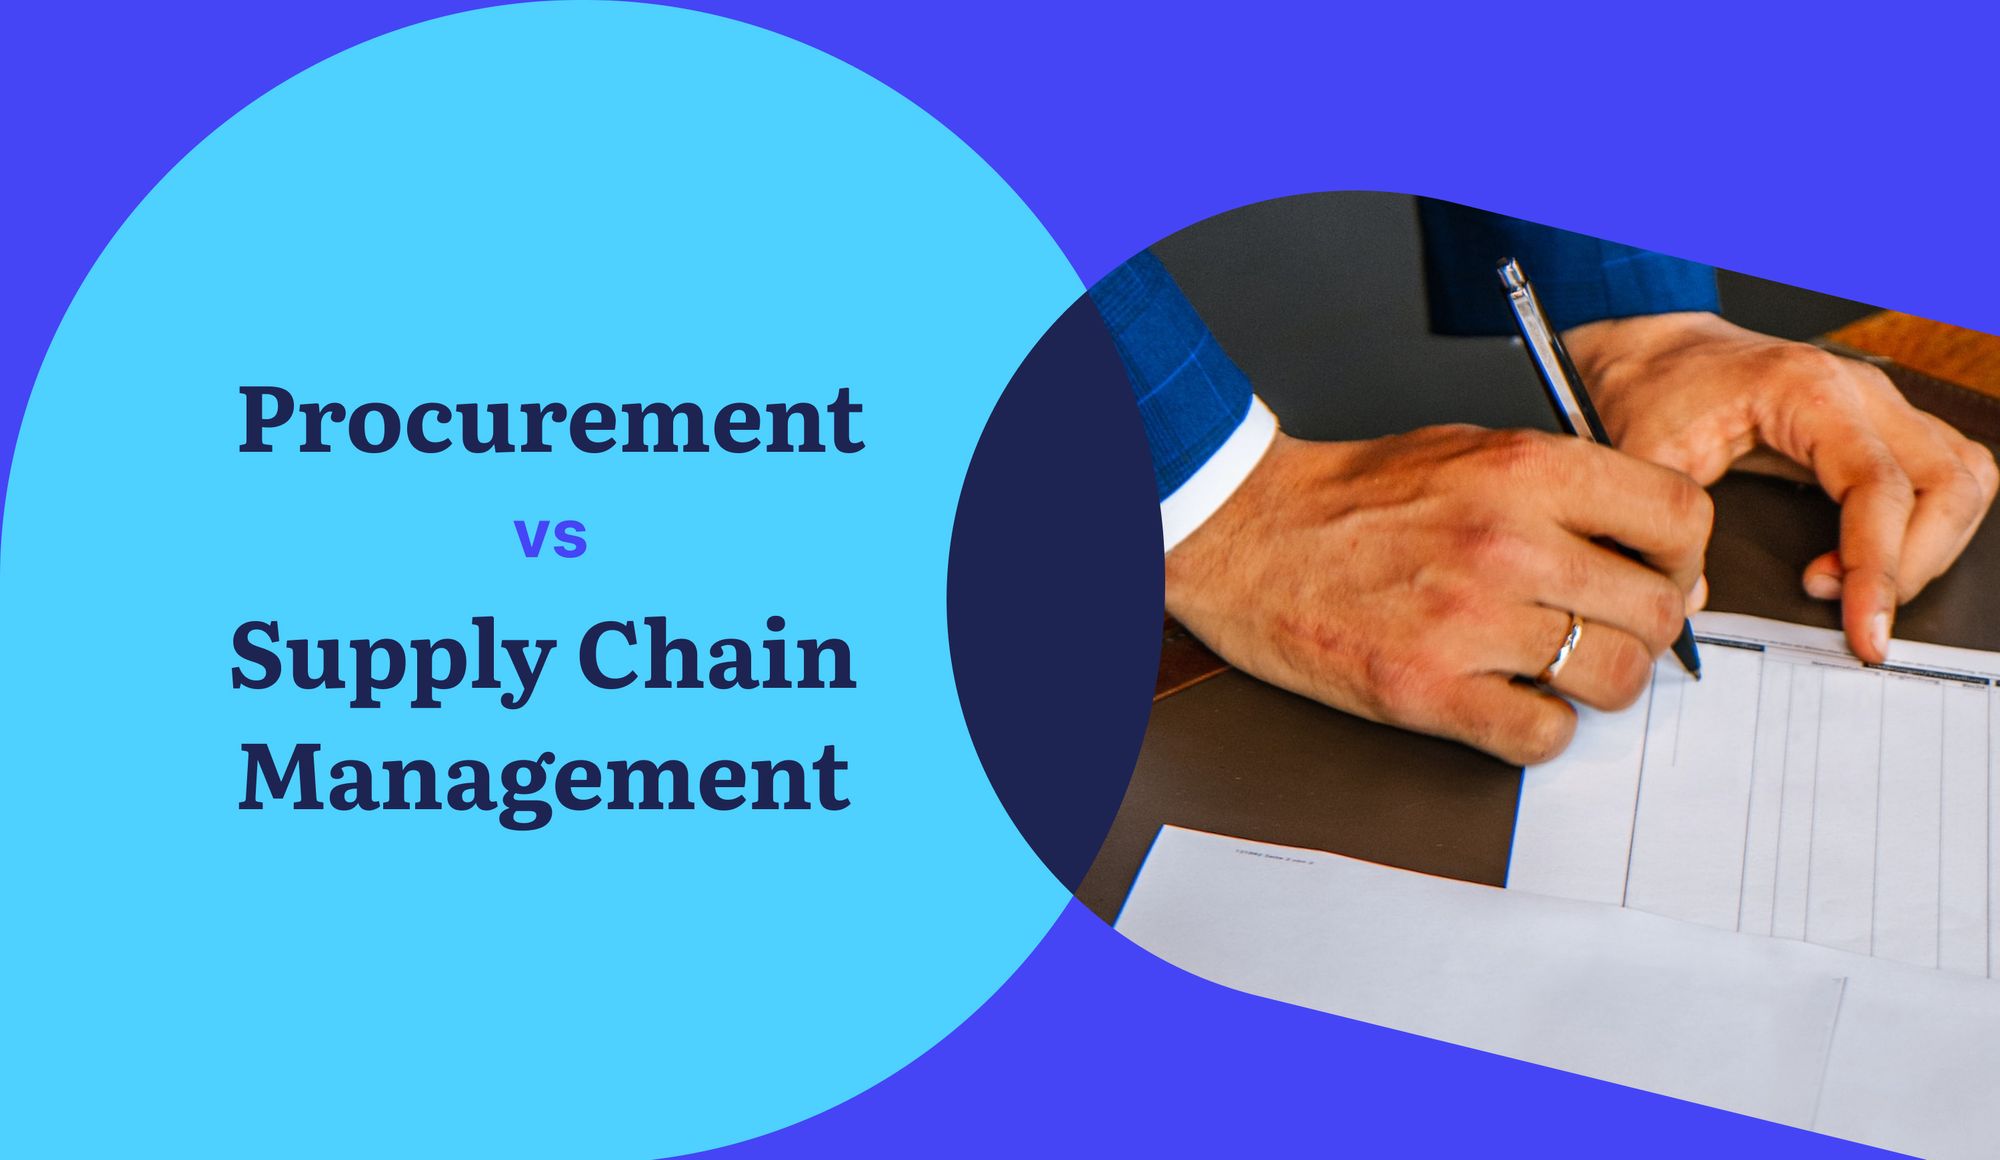 https://precoro.com/blog/content/images/2022/11/The-Difference-Between-Procurement-and-Supply-Chain-Management.jpg